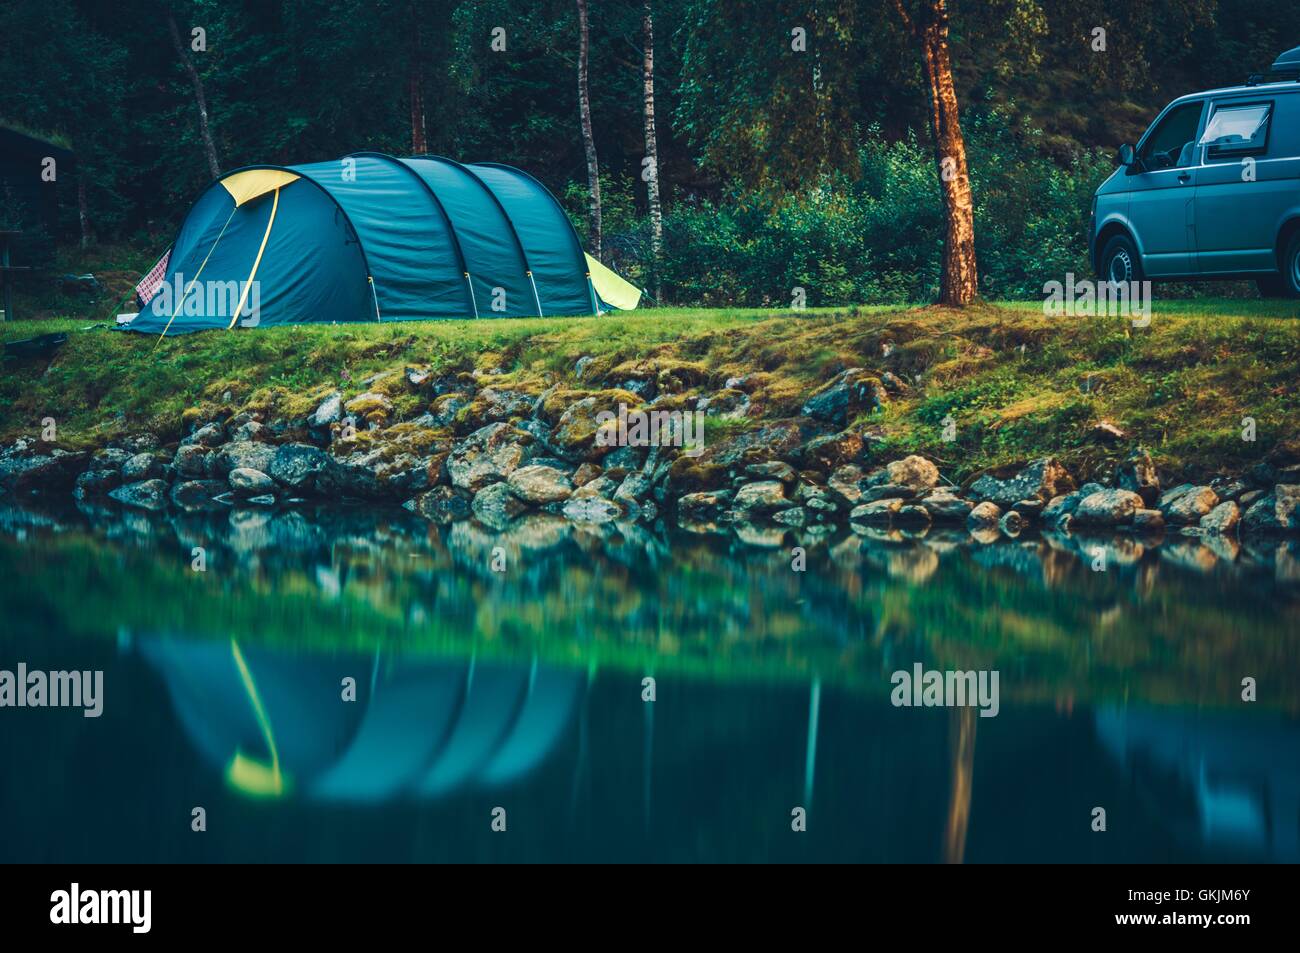 Camping on the Glaciar Lake. Tent Camping on the Campsite. Stock Photo